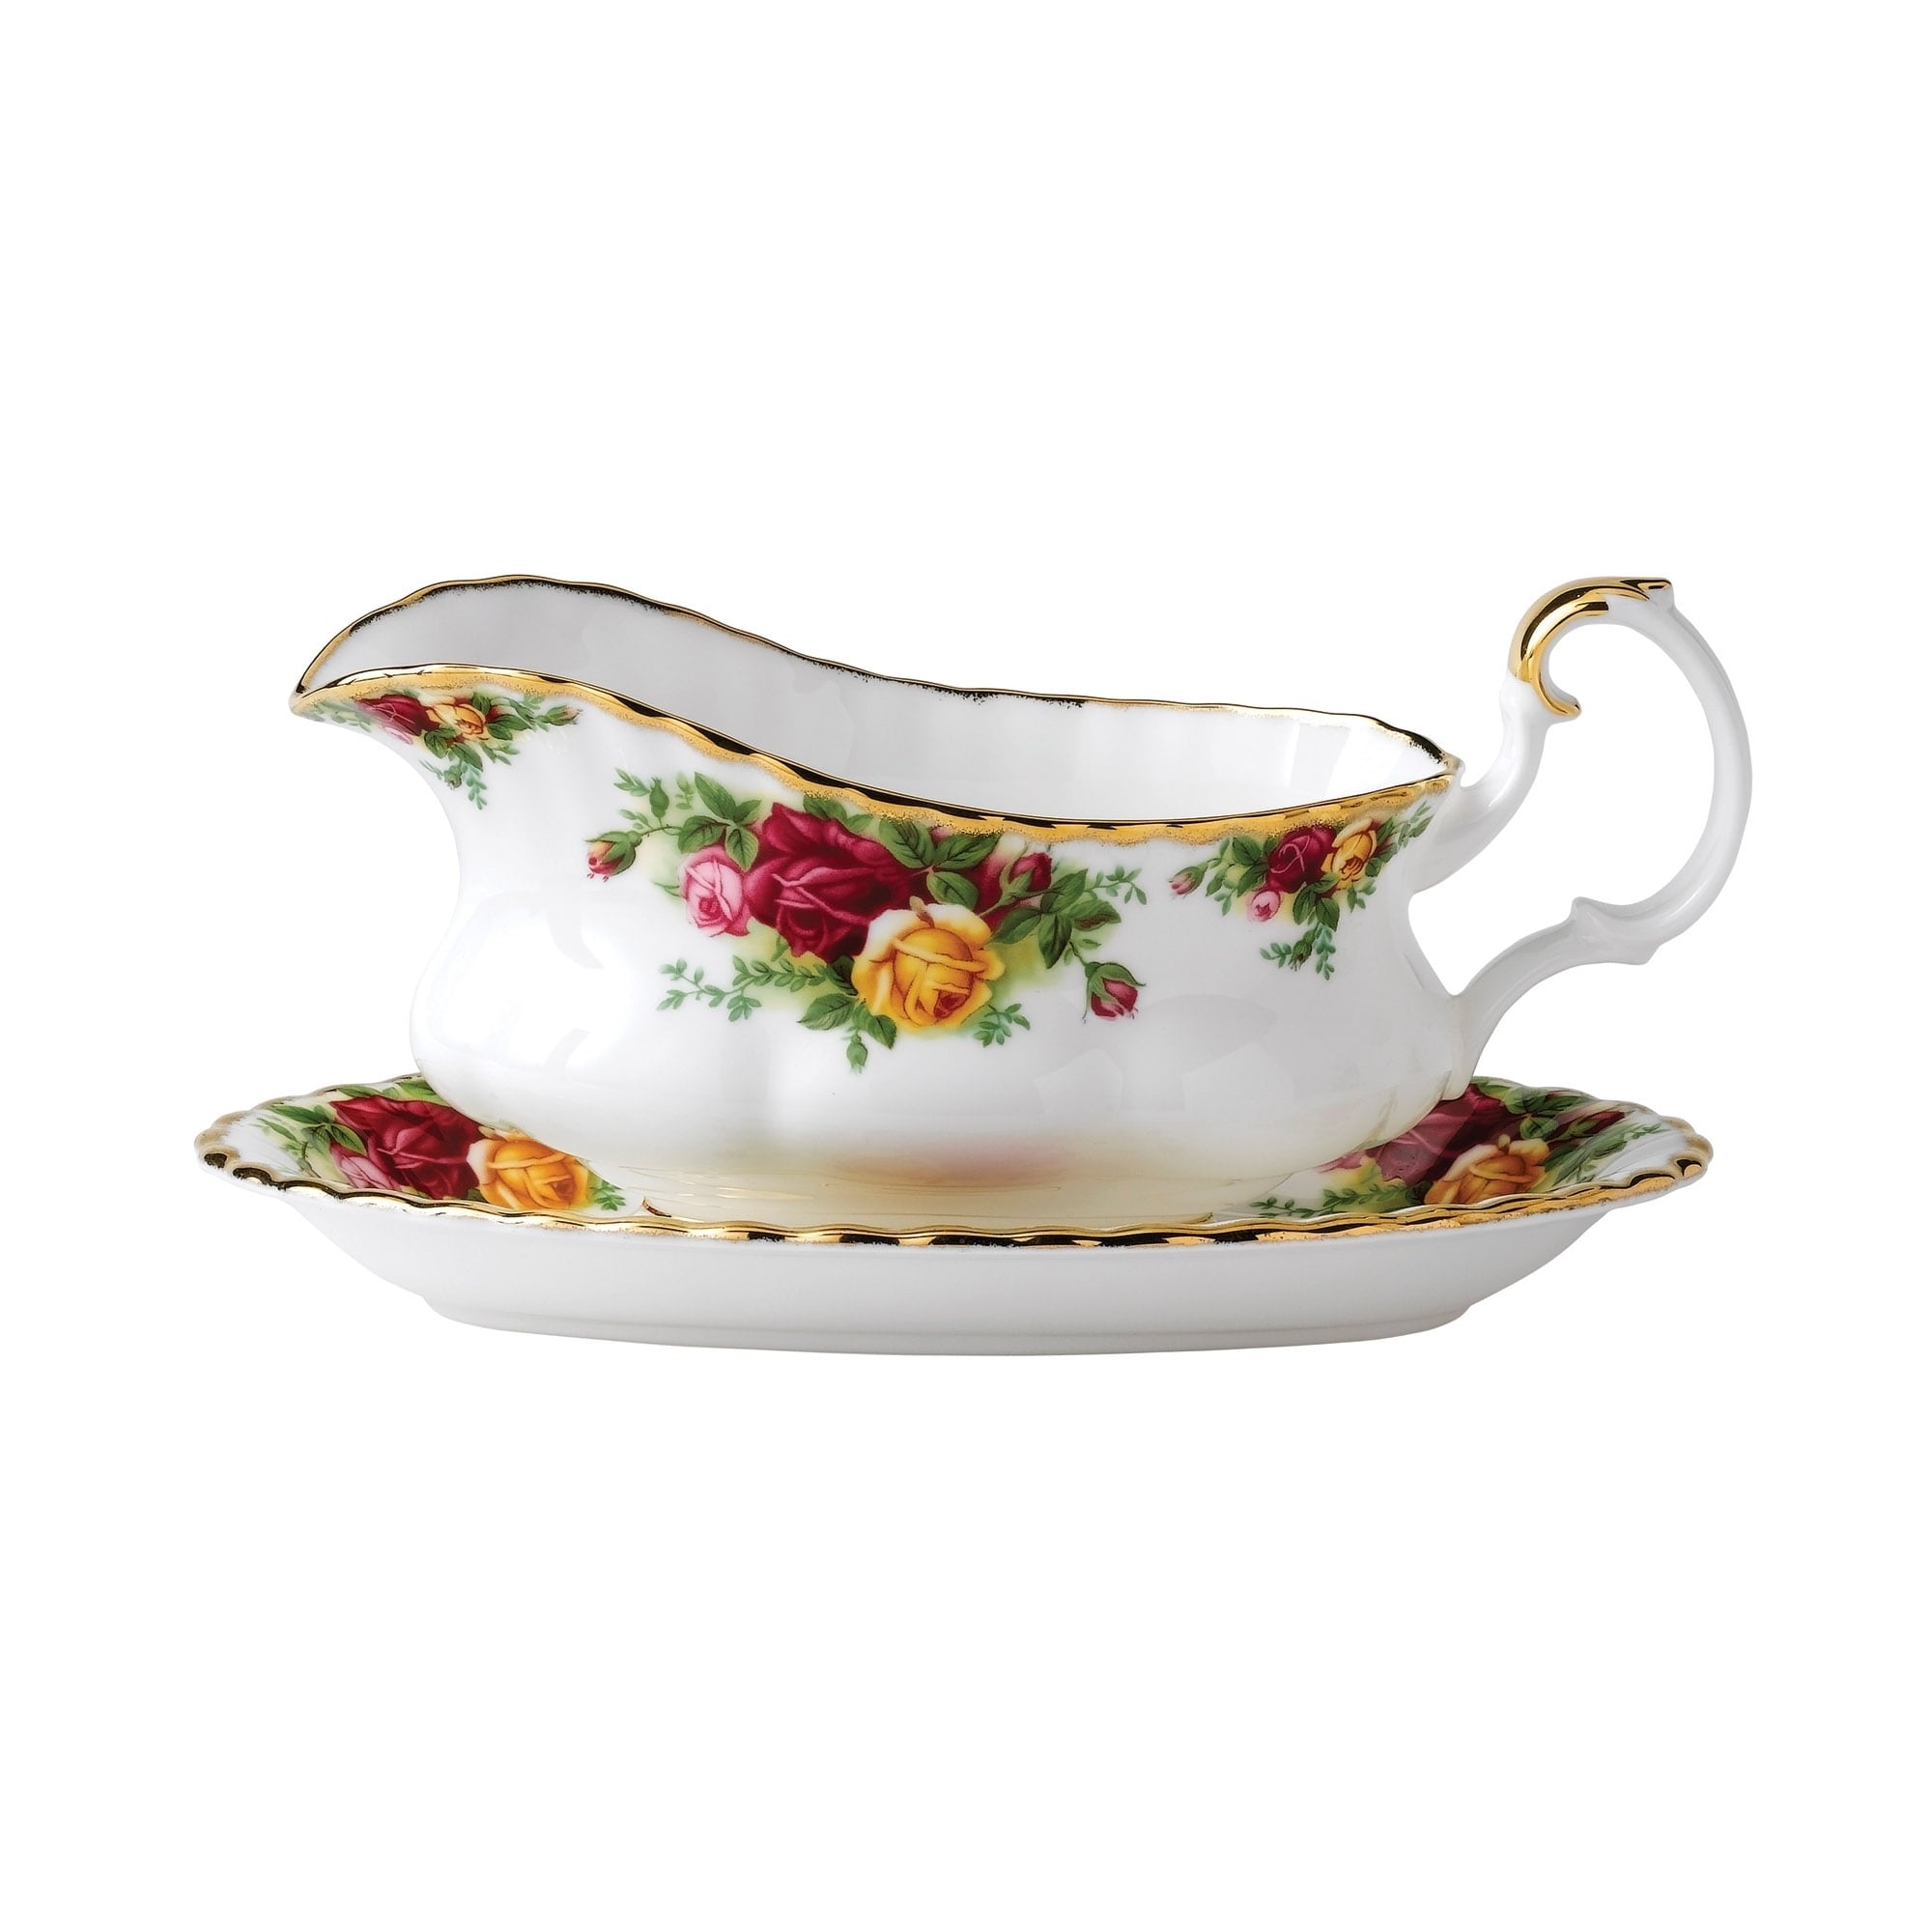 Royal Albert Old Country Roses Soup Tureen, 146 oz, Multi - 3